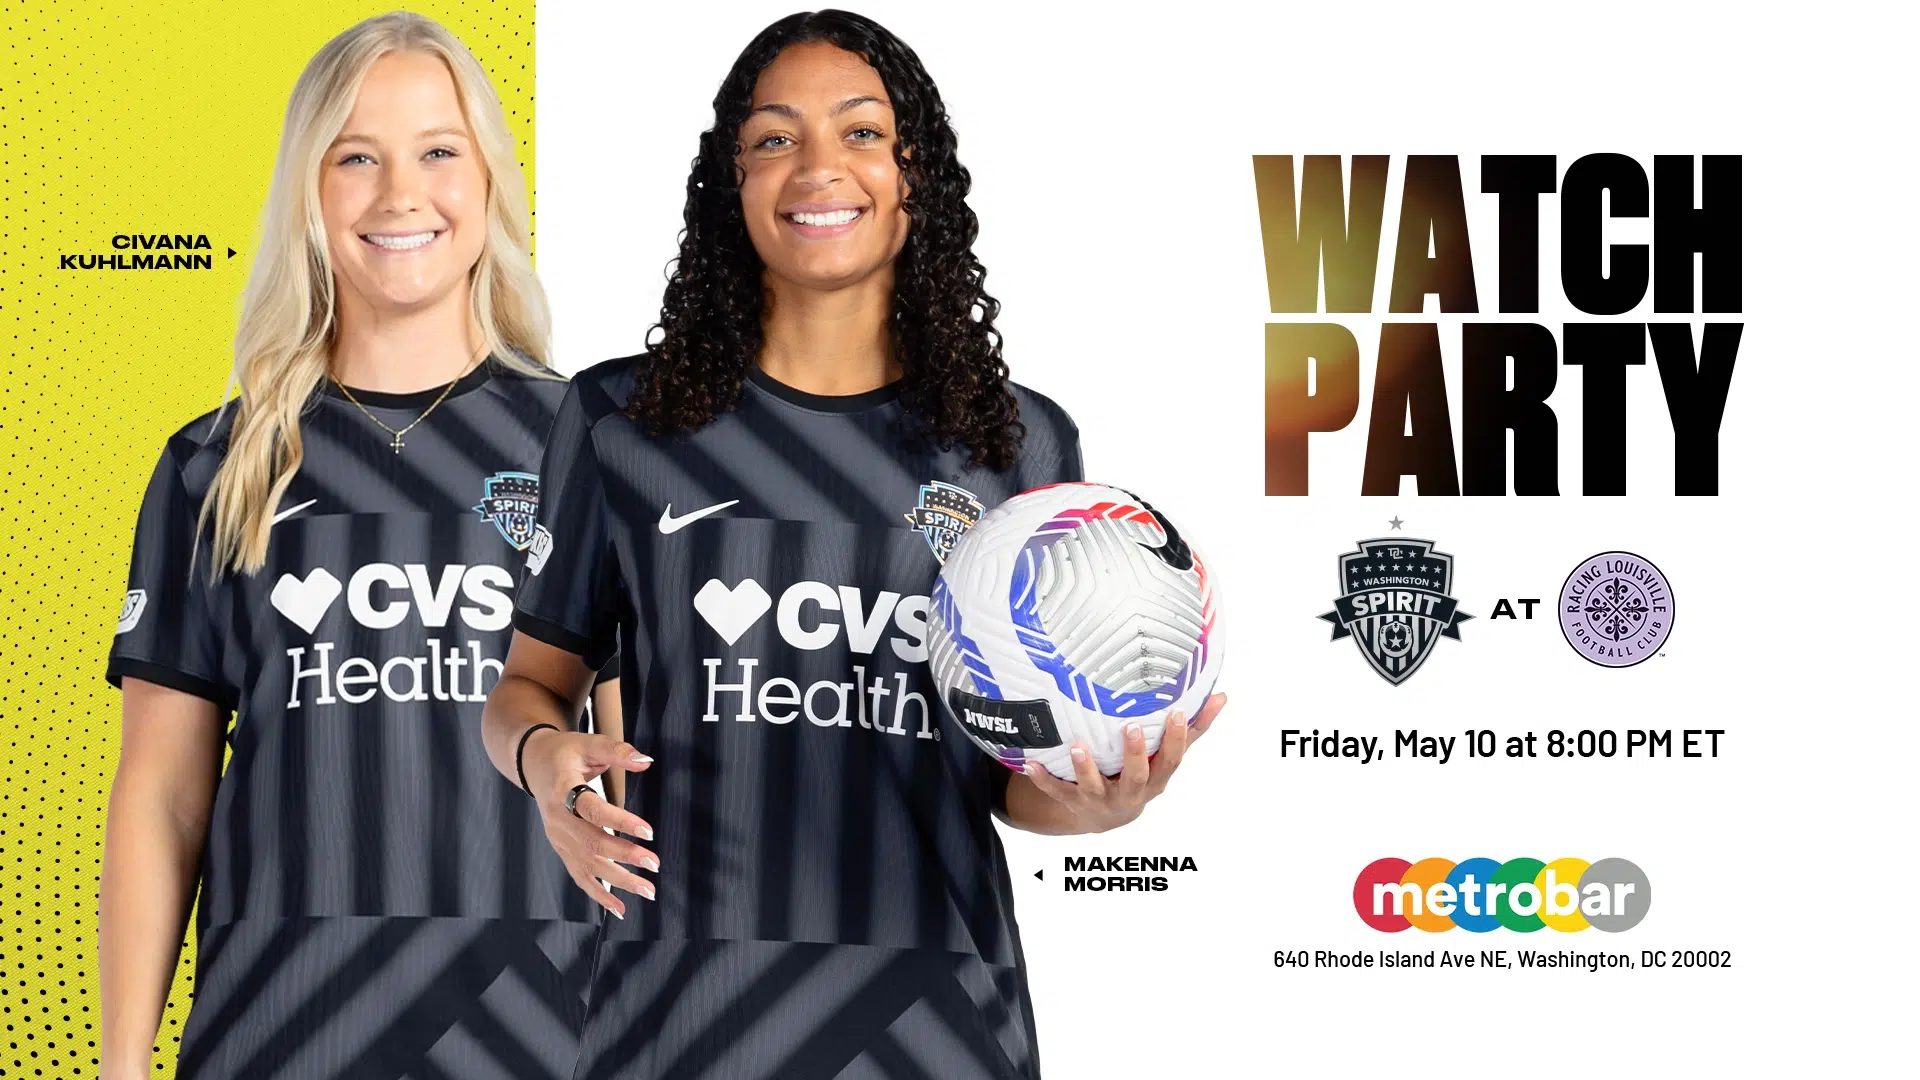 You’re Invited: Washington Spirit vs. Racing Louisville FC Watch Party with Civana Kuhlmann & Makenna Morris at metrobar Featured Image